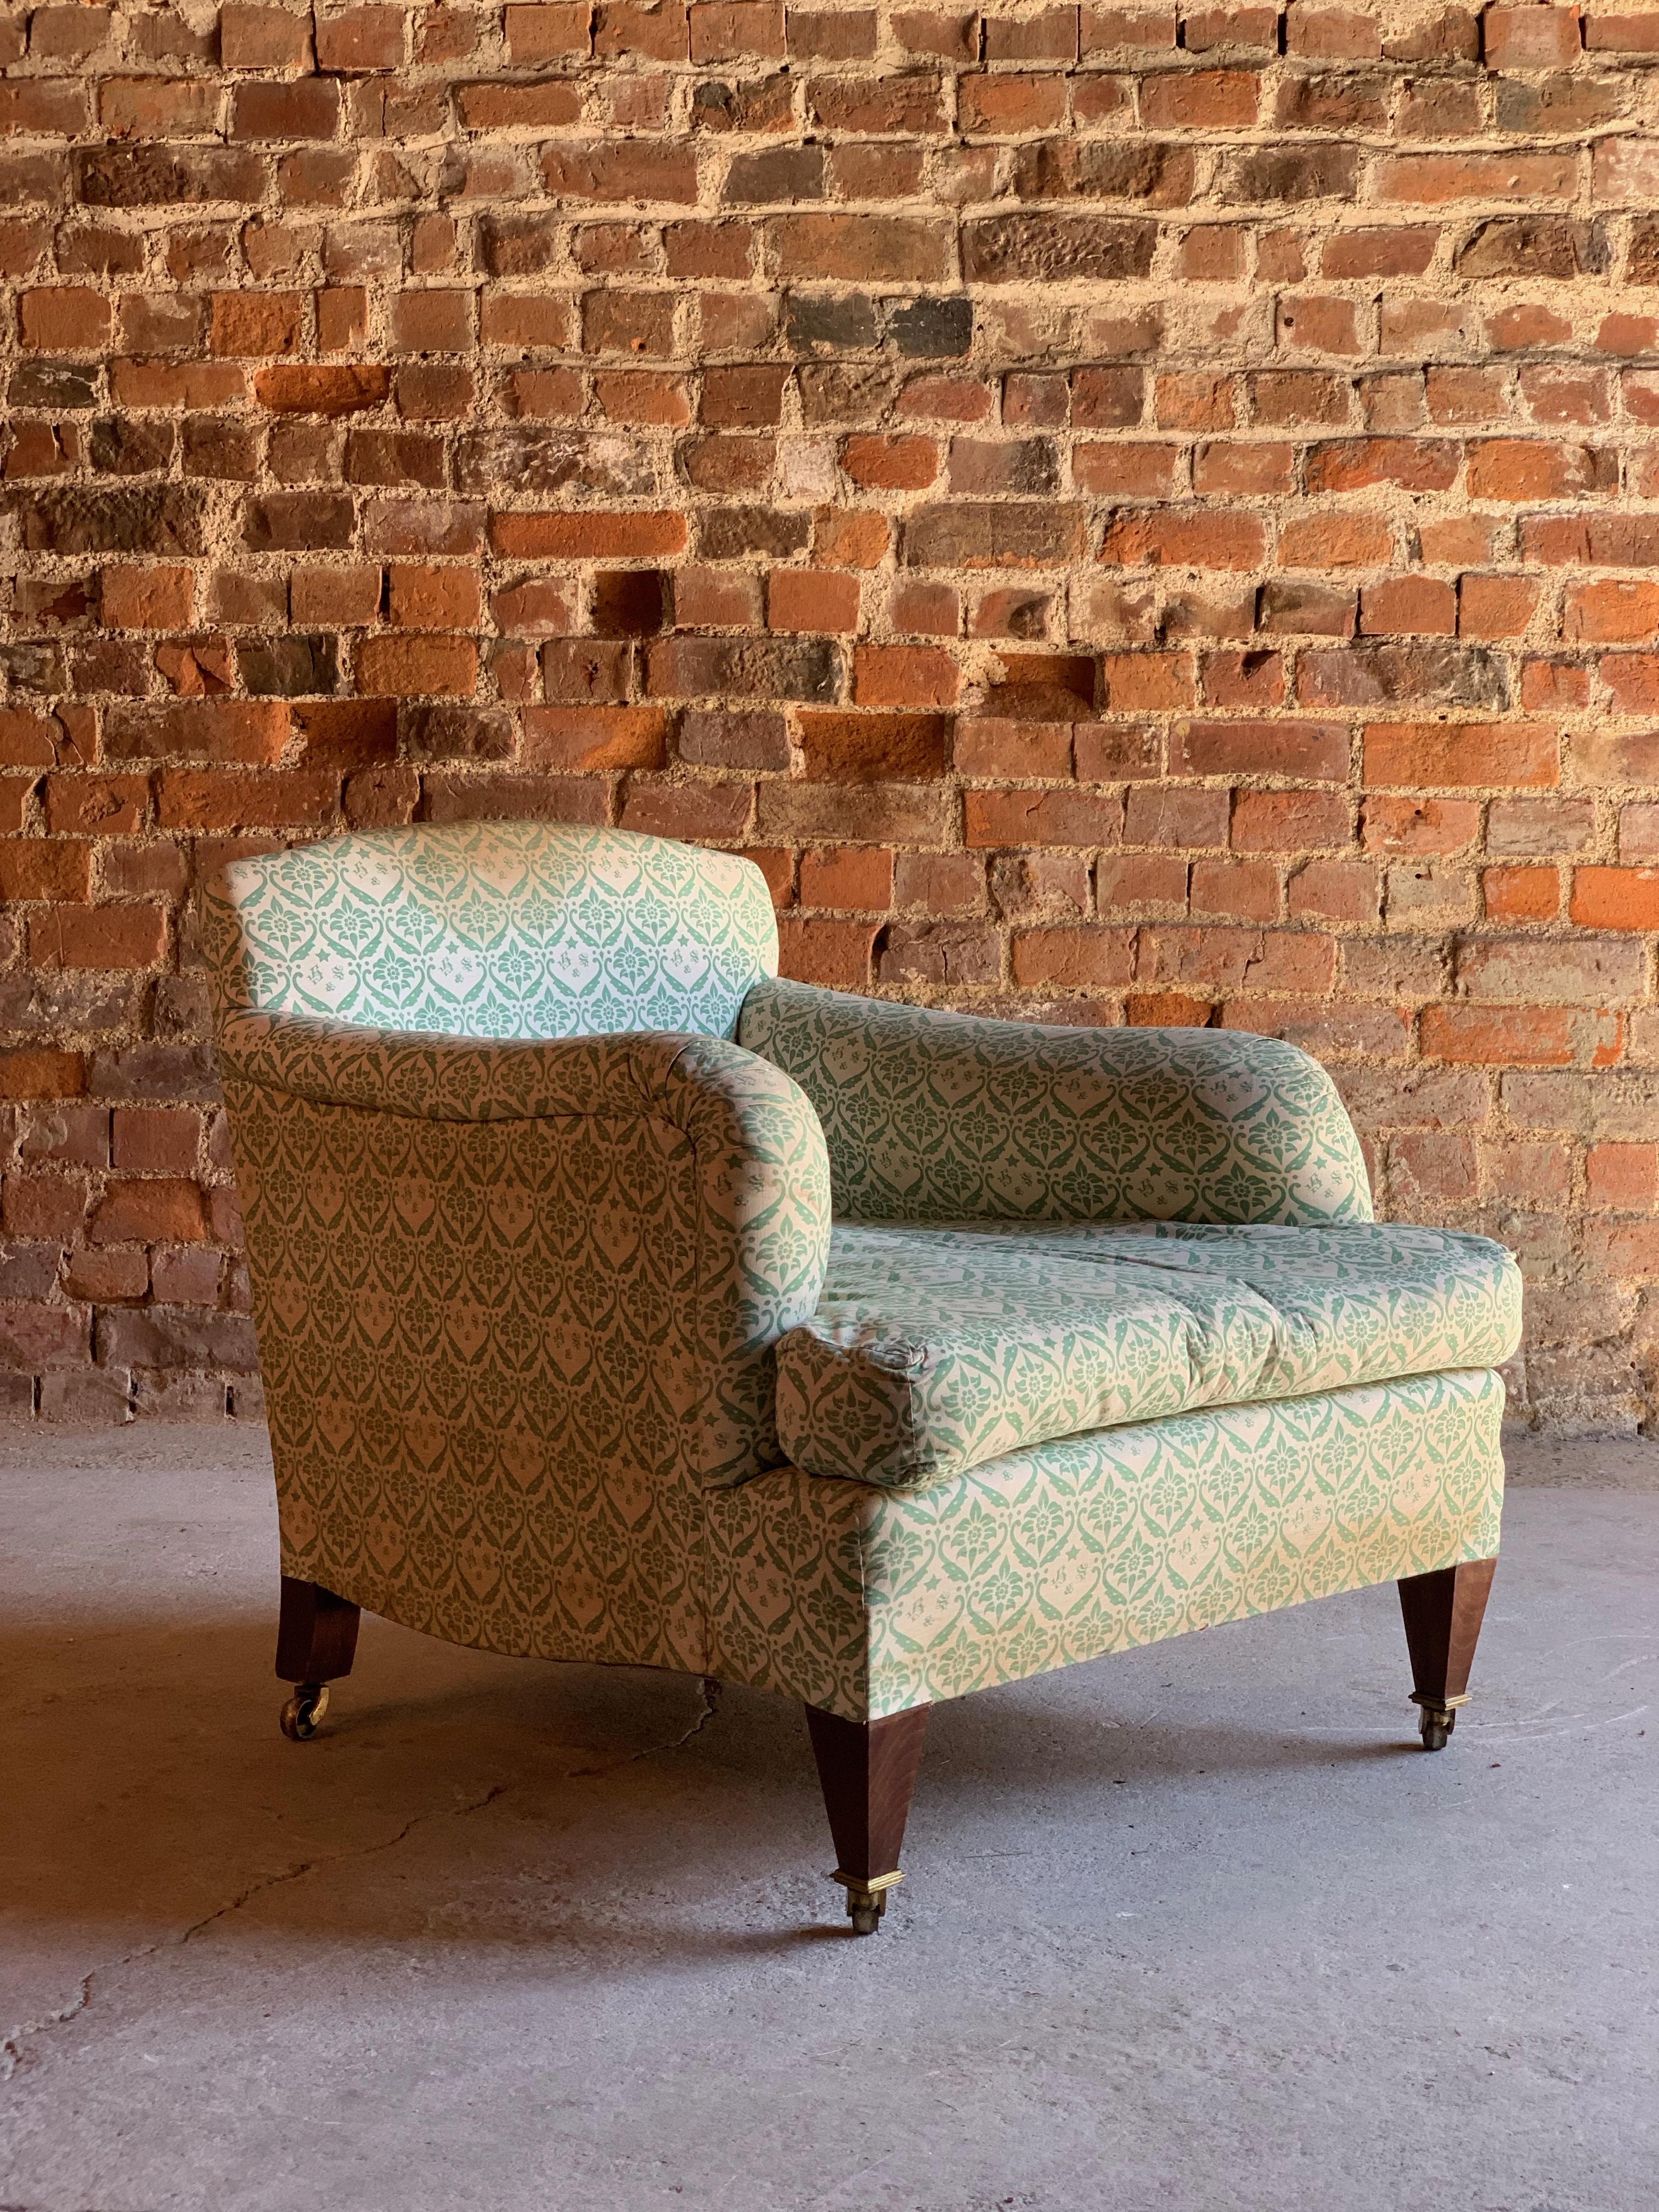 Howard & Sons Bridgewater Howard Armchair by Lenygon & Morant, circa 1950

A wonderful small Bridgewater Howard Armchair by Lenygon & Morant labelled to underside and stamped to rear leg Howard Chairs Limited, Number 1583, raised on short tapered